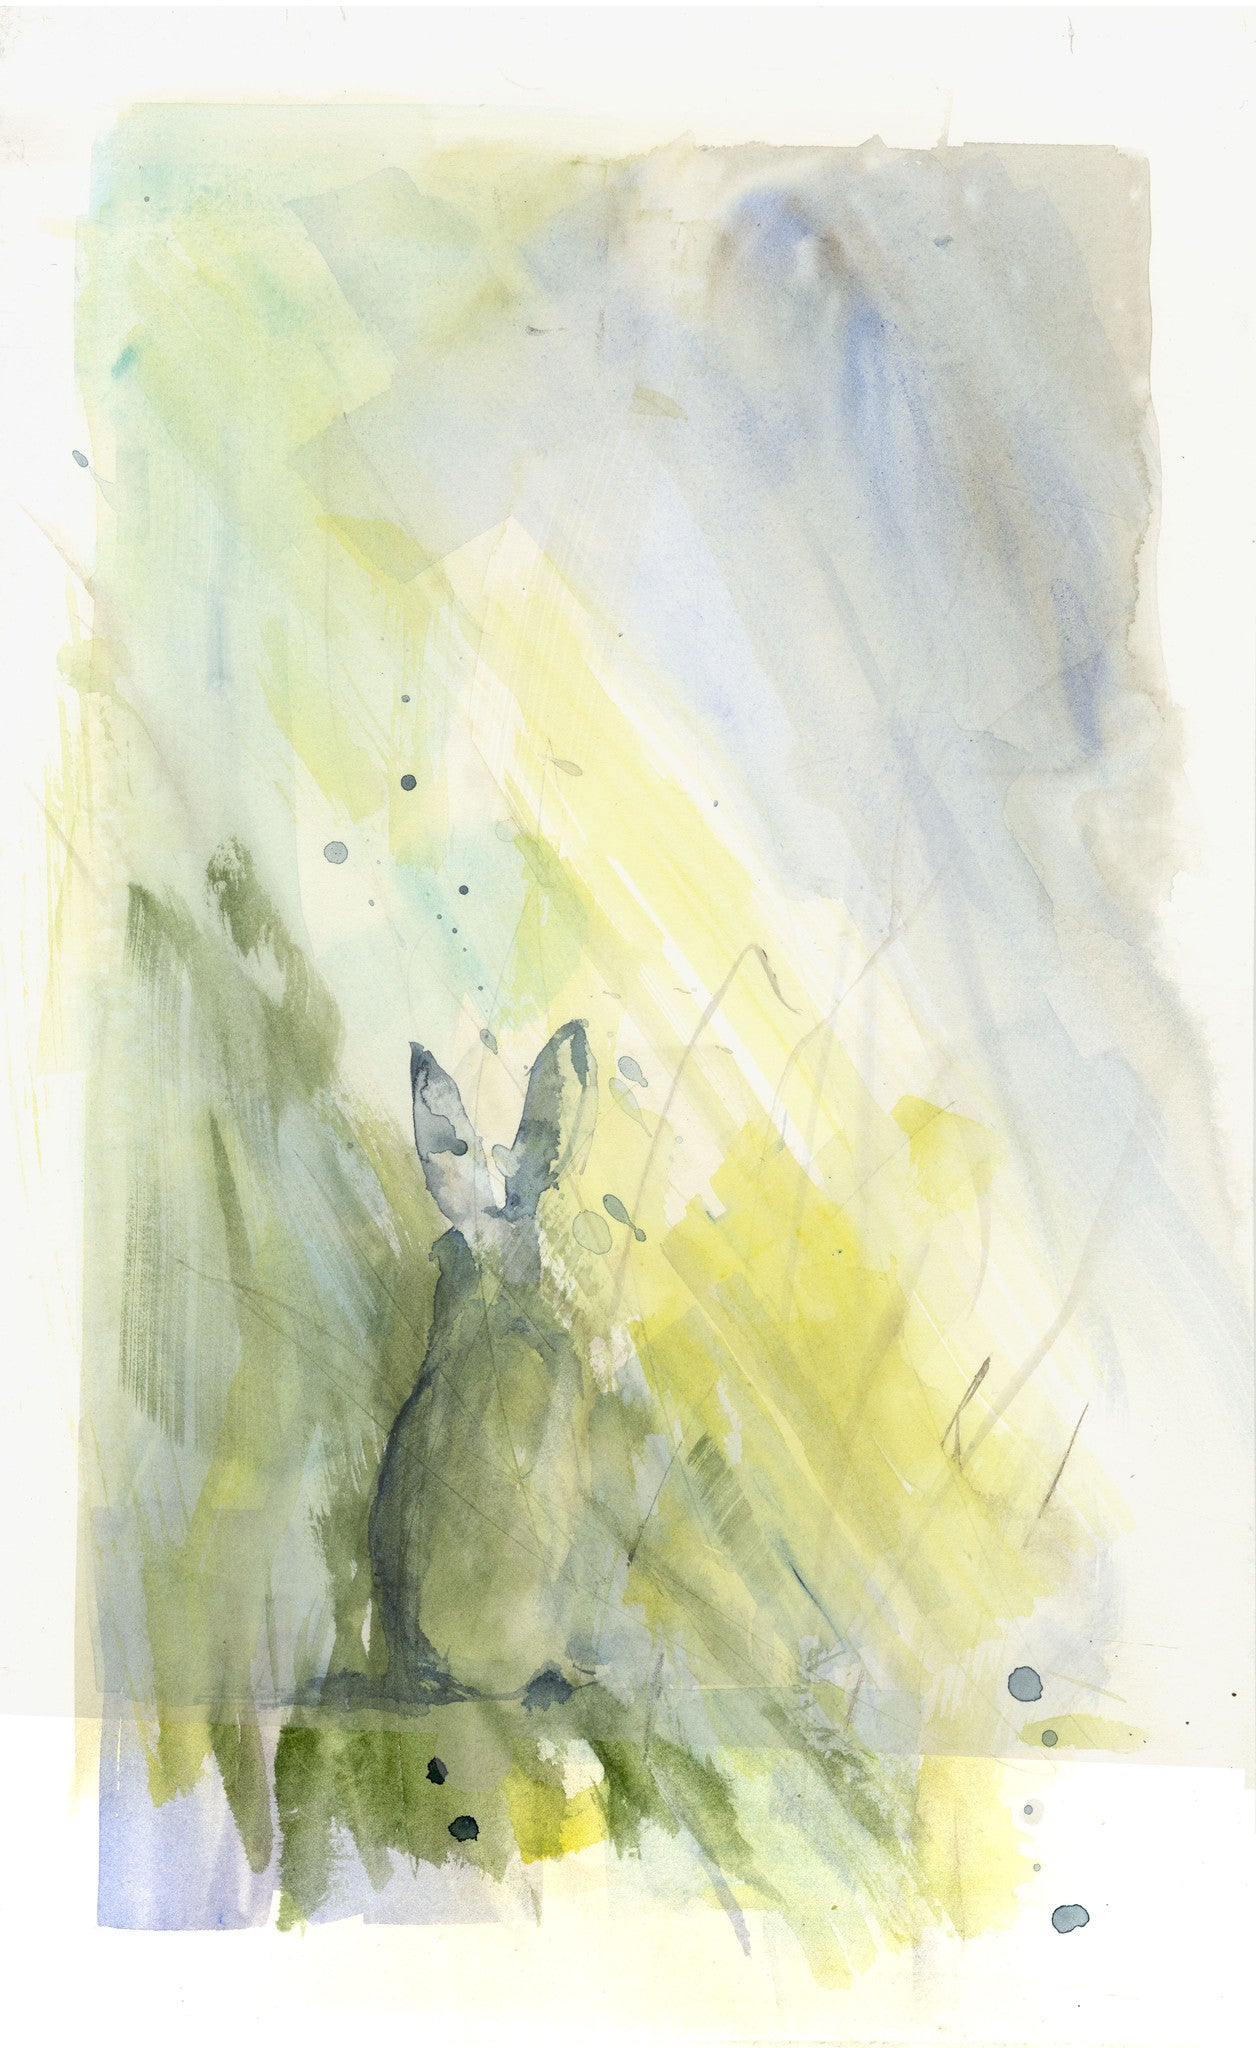 Limited edition print "hare in the mist" - Jen Buckley Art limited edition animal art prints